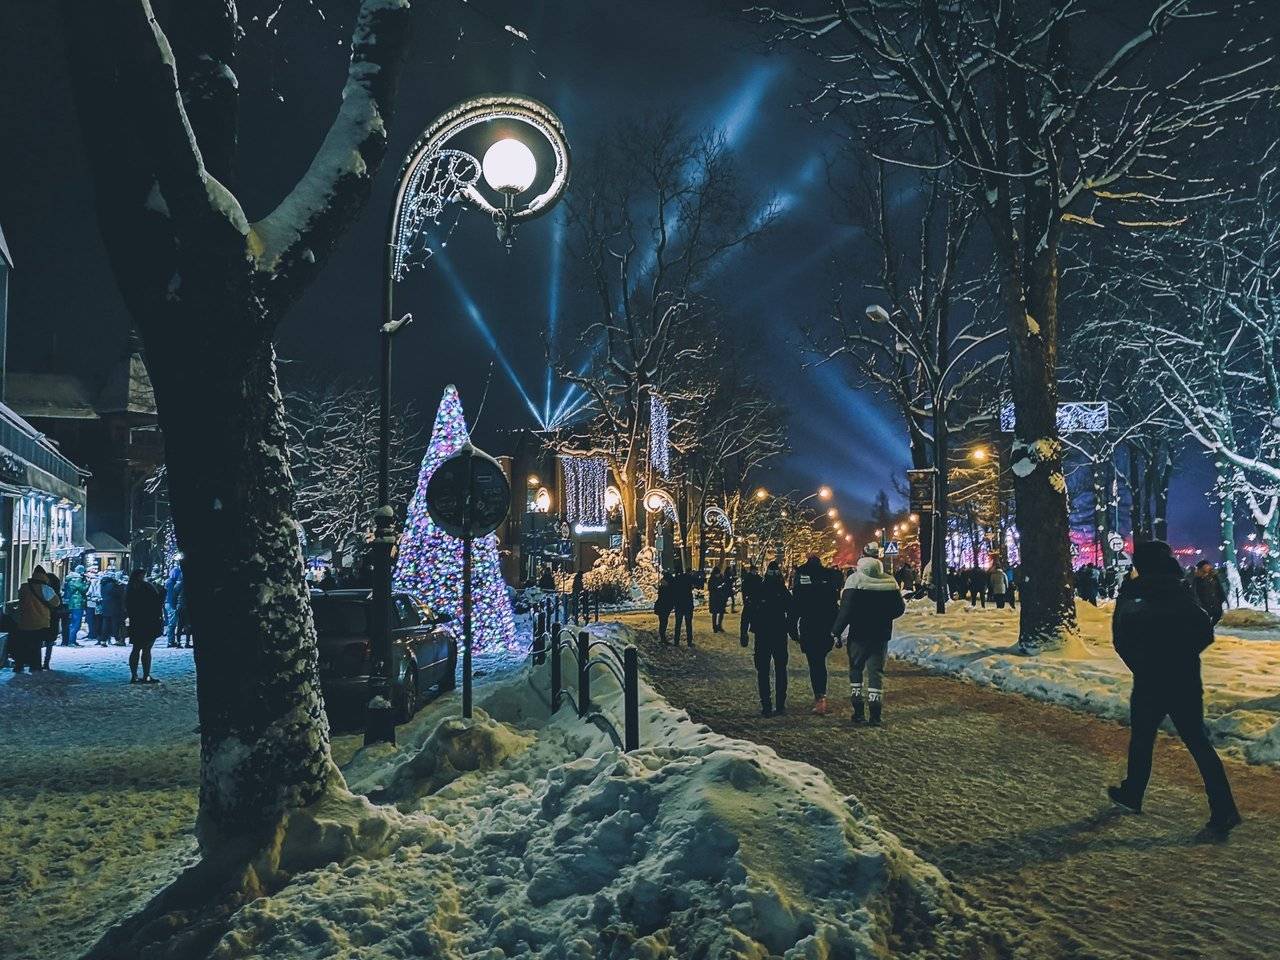   New Year’s Eve in Zakopane. Photo by Alis Monte [CC BY-SA 4.0], via Connecting the Dots